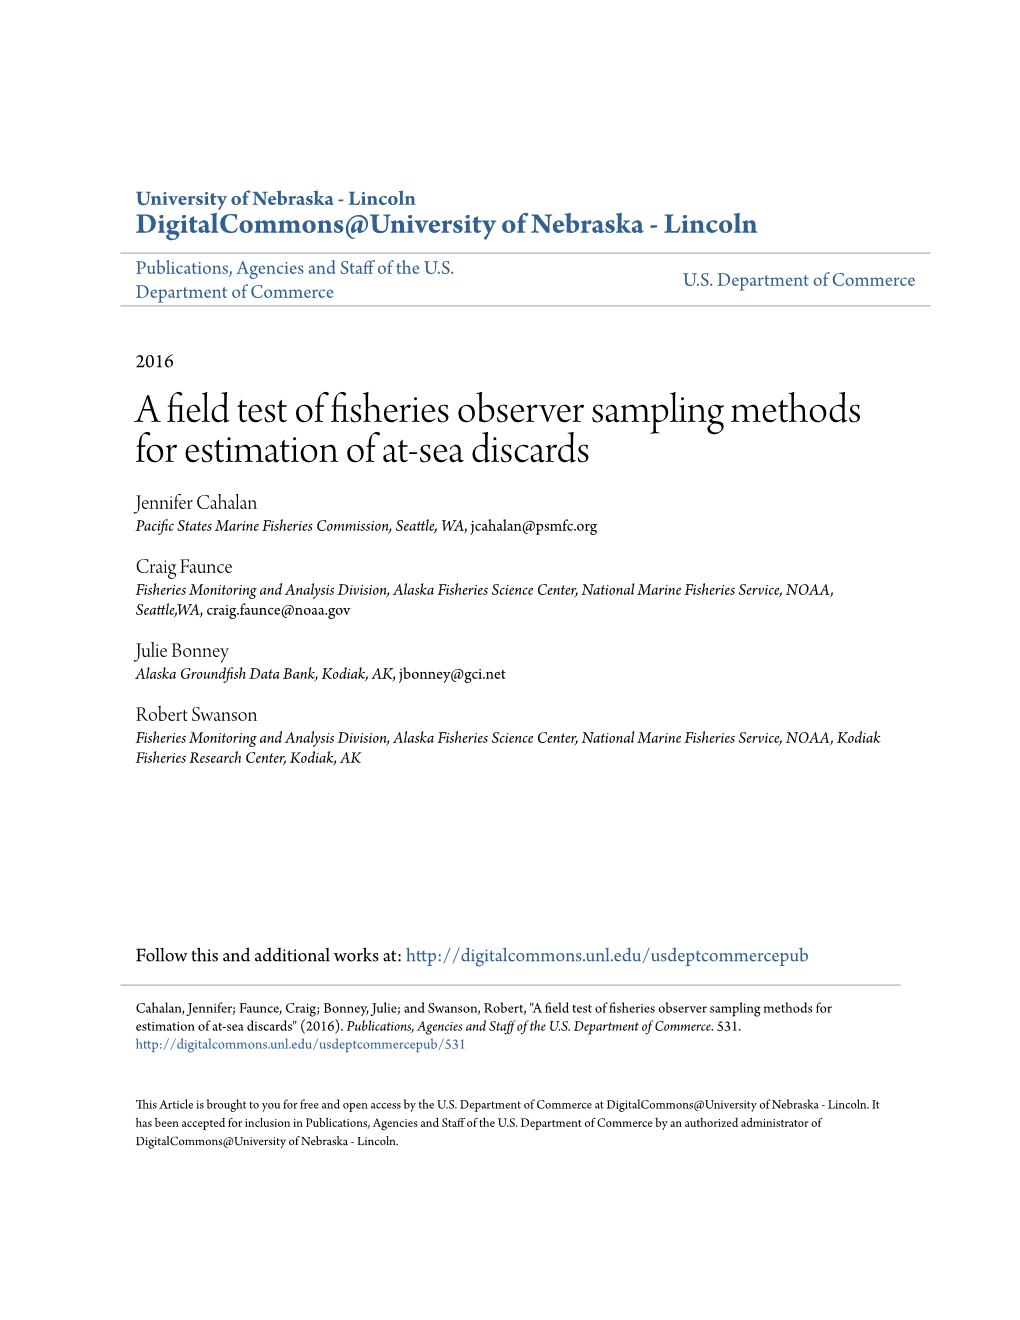 A Field Test of Fisheries Observer Sampling Methods for Estimation of At-Sea Discards" (2016)